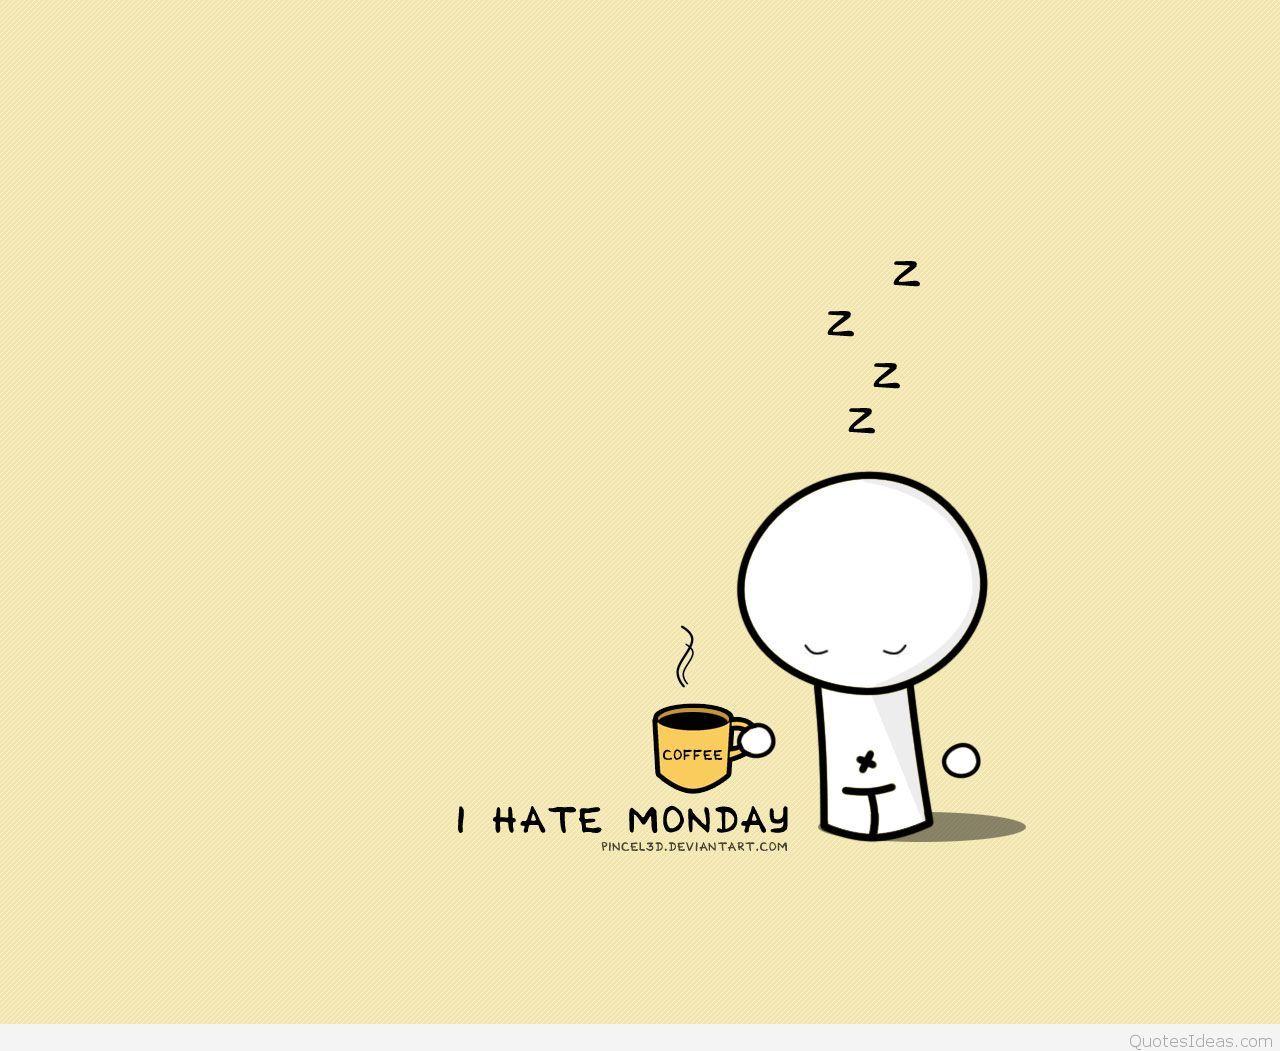 Funny Coffee Pictures Free Wallpapers